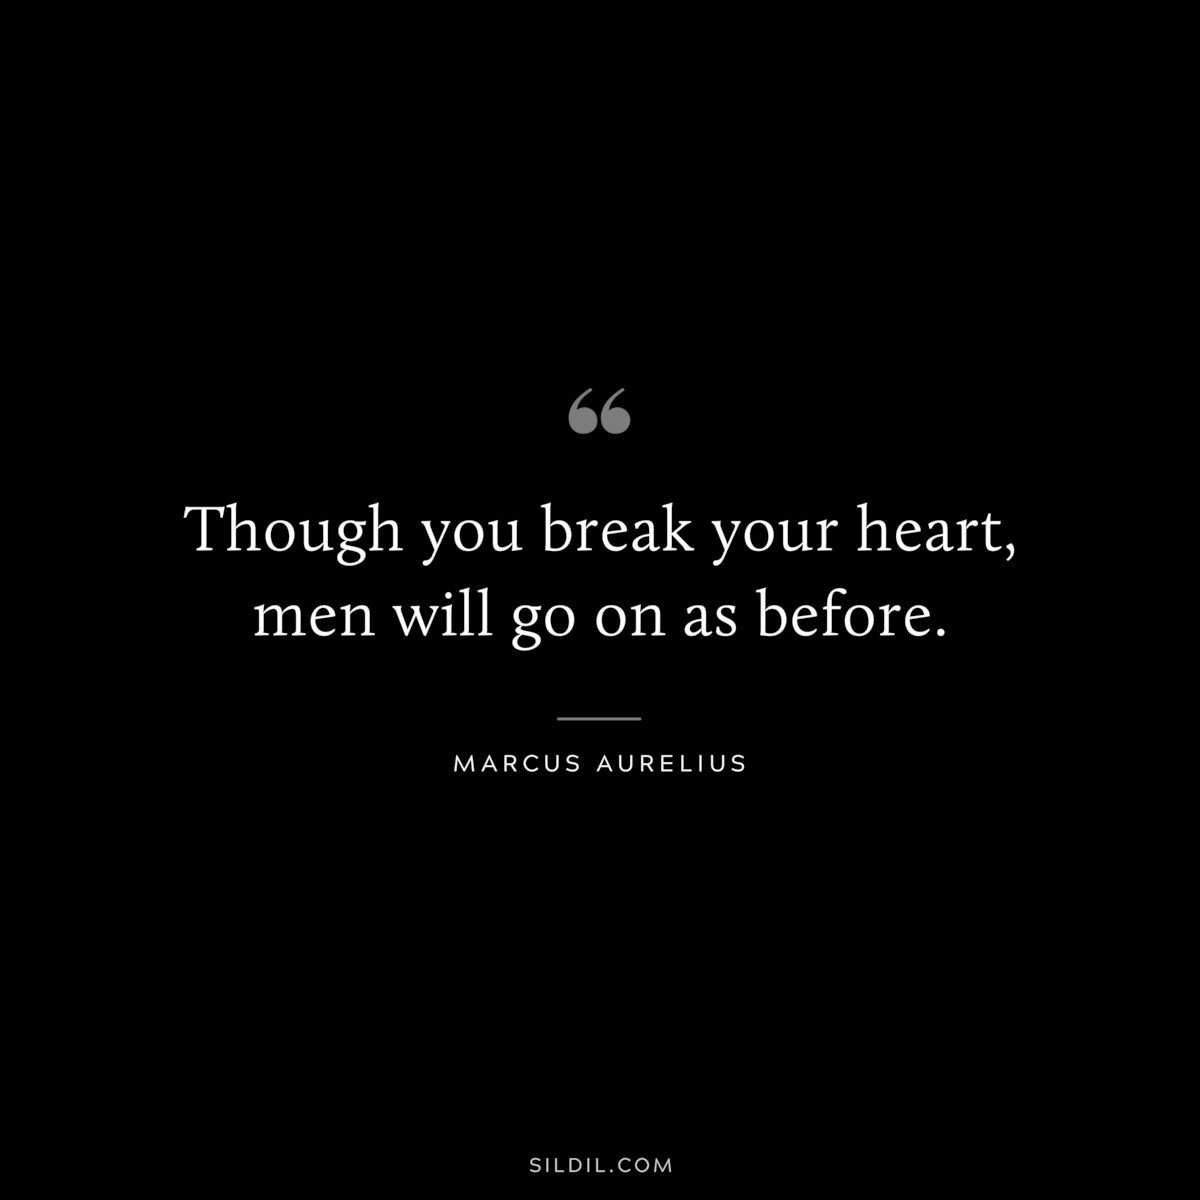 Though you break your heart, men will go on as before. ― Marcus Aurelius